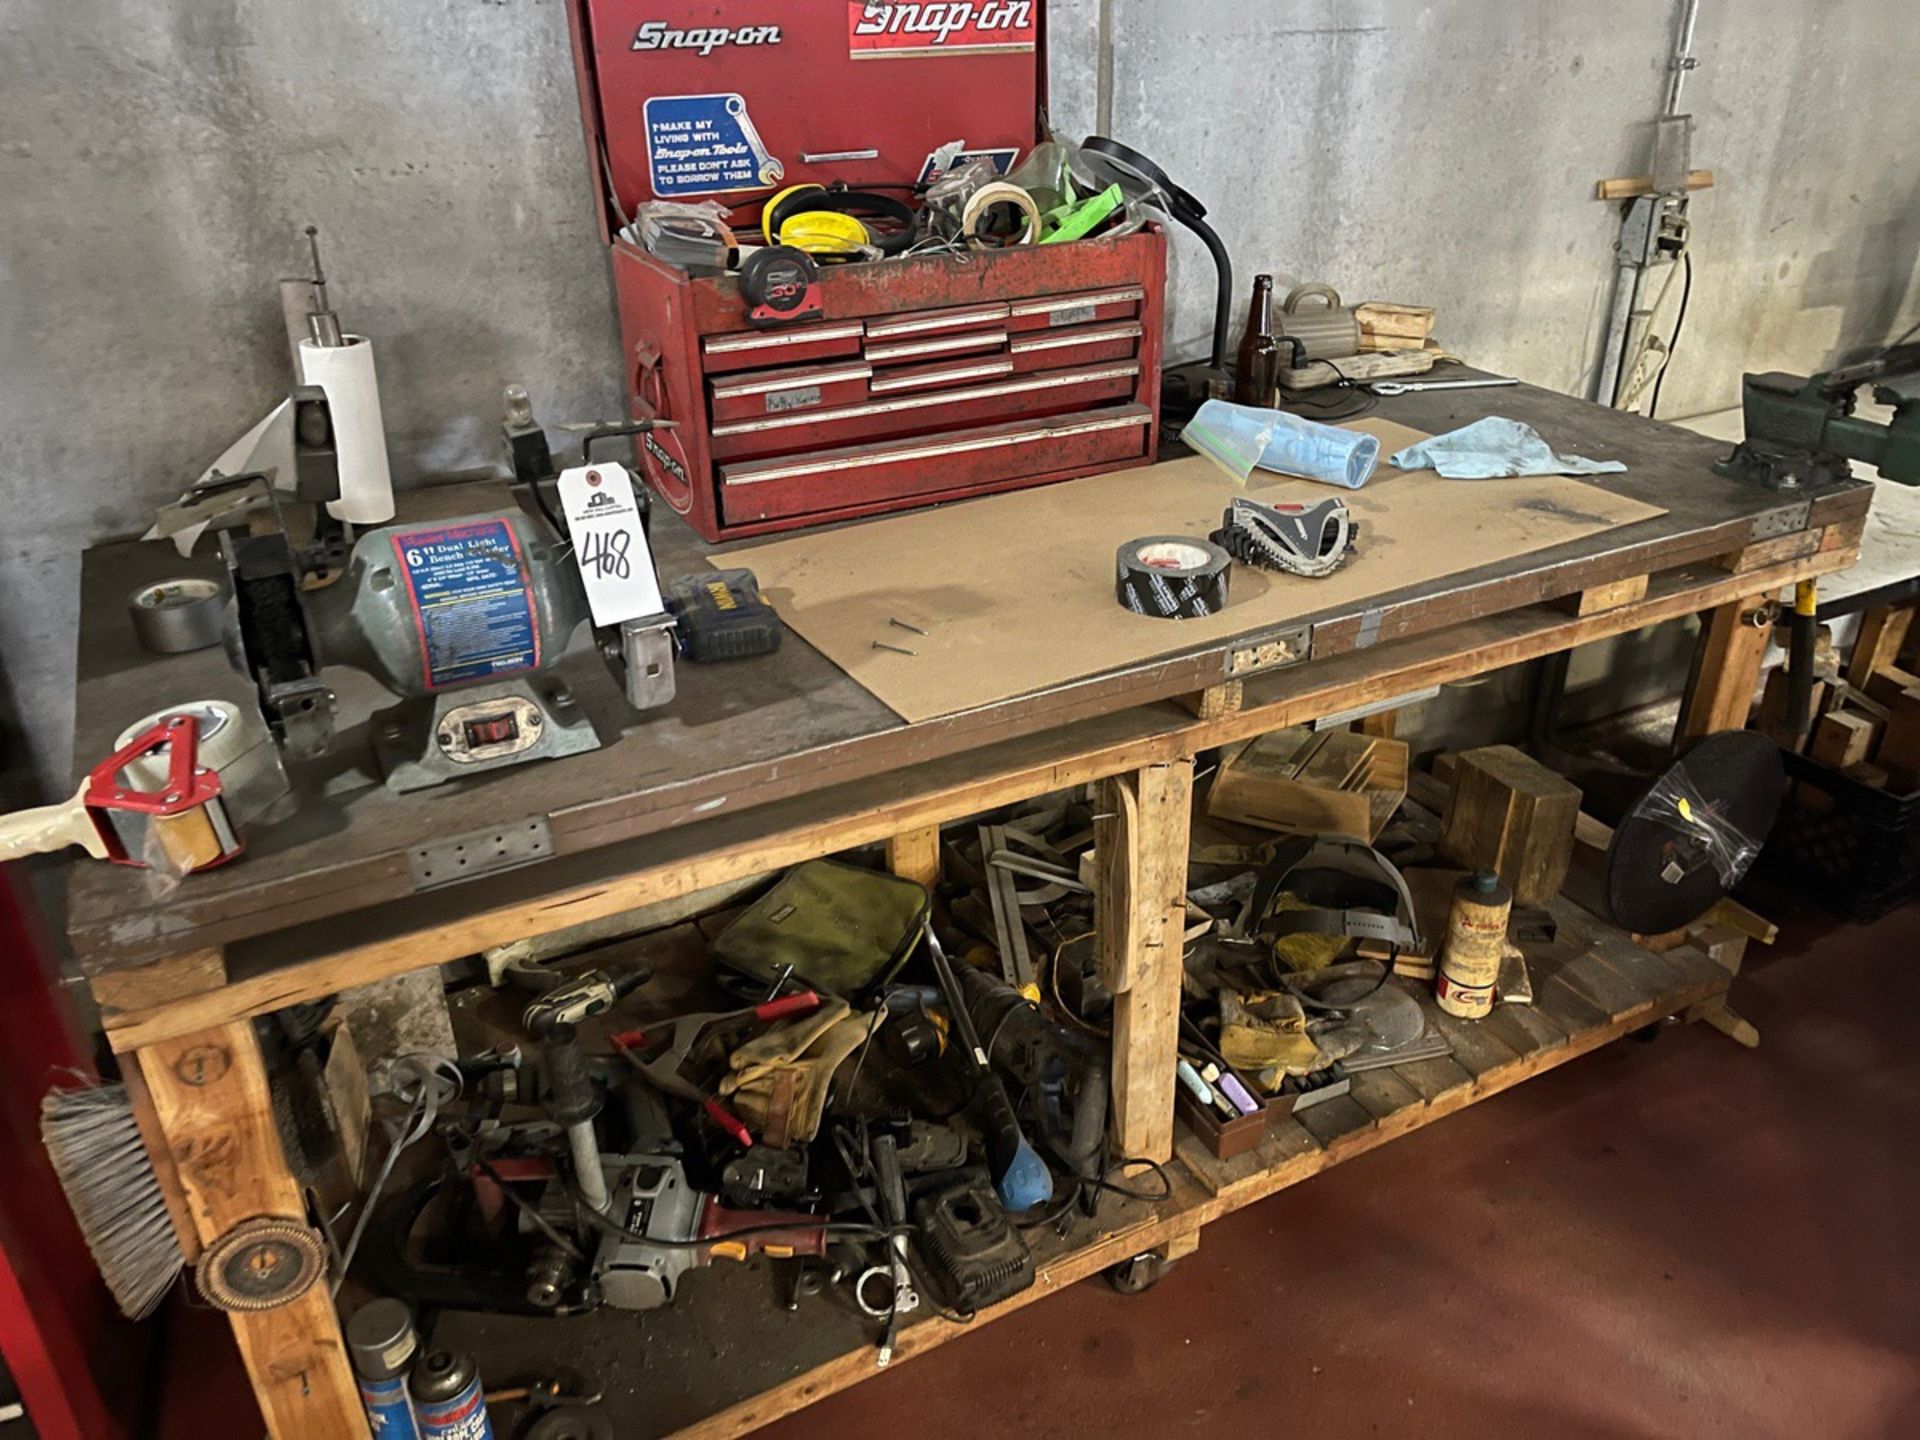 Contents of Work Bench | Rig Fee $150